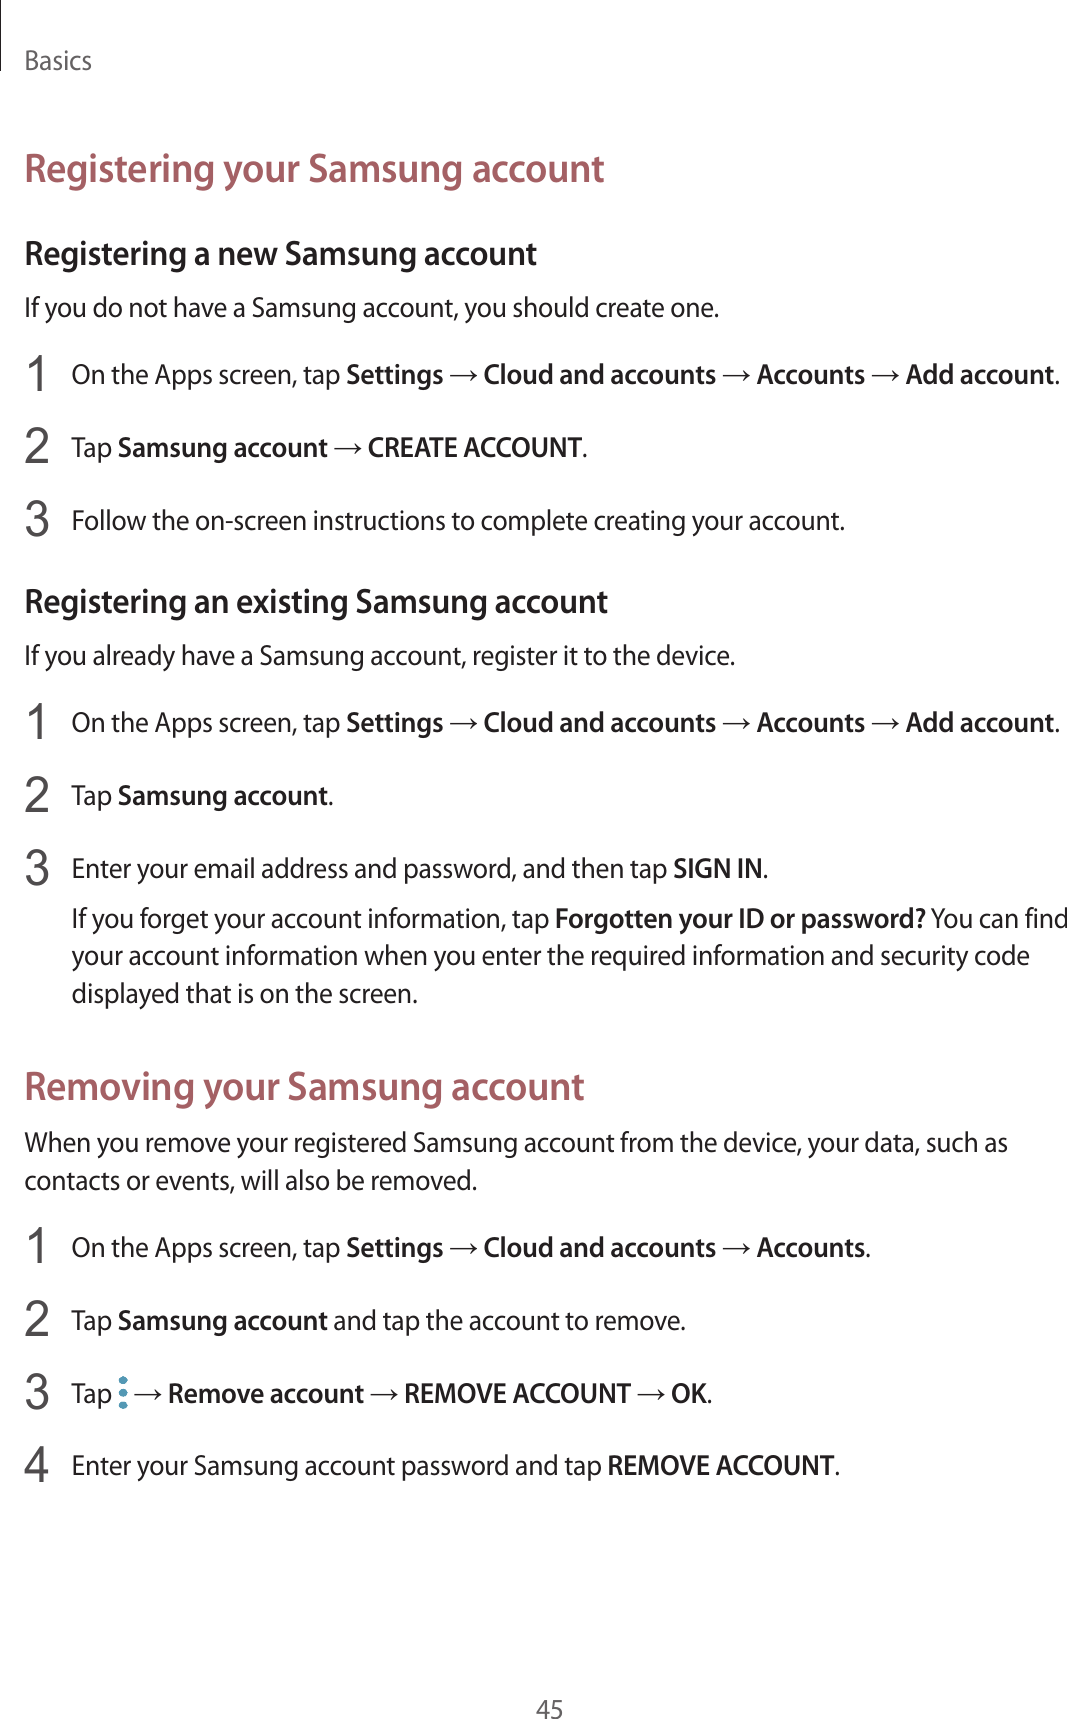 Basics45Registering your Samsung accountRegistering a new Samsung accountIf you do not have a Samsung account, you should create one.1  On the Apps screen, tap Settings → Cloud and accounts → Accounts → Add account.2  Tap Samsung account → CREATE ACCOUNT.3  Follow the on-screen instructions to complete creating your account.Registering an existing Samsung accountIf you already have a Samsung account, register it to the device.1  On the Apps screen, tap Settings → Cloud and accounts → Accounts → Add account.2  Tap Samsung account.3  Enter your email address and password, and then tap SIGN IN.If you forget your account information, tap Forgotten your ID or password? You can find your account information when you enter the required information and security code displayed that is on the screen.Removing your Samsung accountWhen you remove your registered Samsung account from the device, your data, such as contacts or events, will also be removed.1  On the Apps screen, tap Settings → Cloud and accounts → Accounts.2  Tap Samsung account and tap the account to remove.3  Tap   → Remove account → REMOVE ACCOUNT → OK.4  Enter your Samsung account password and tap REMOVE ACCOUNT.